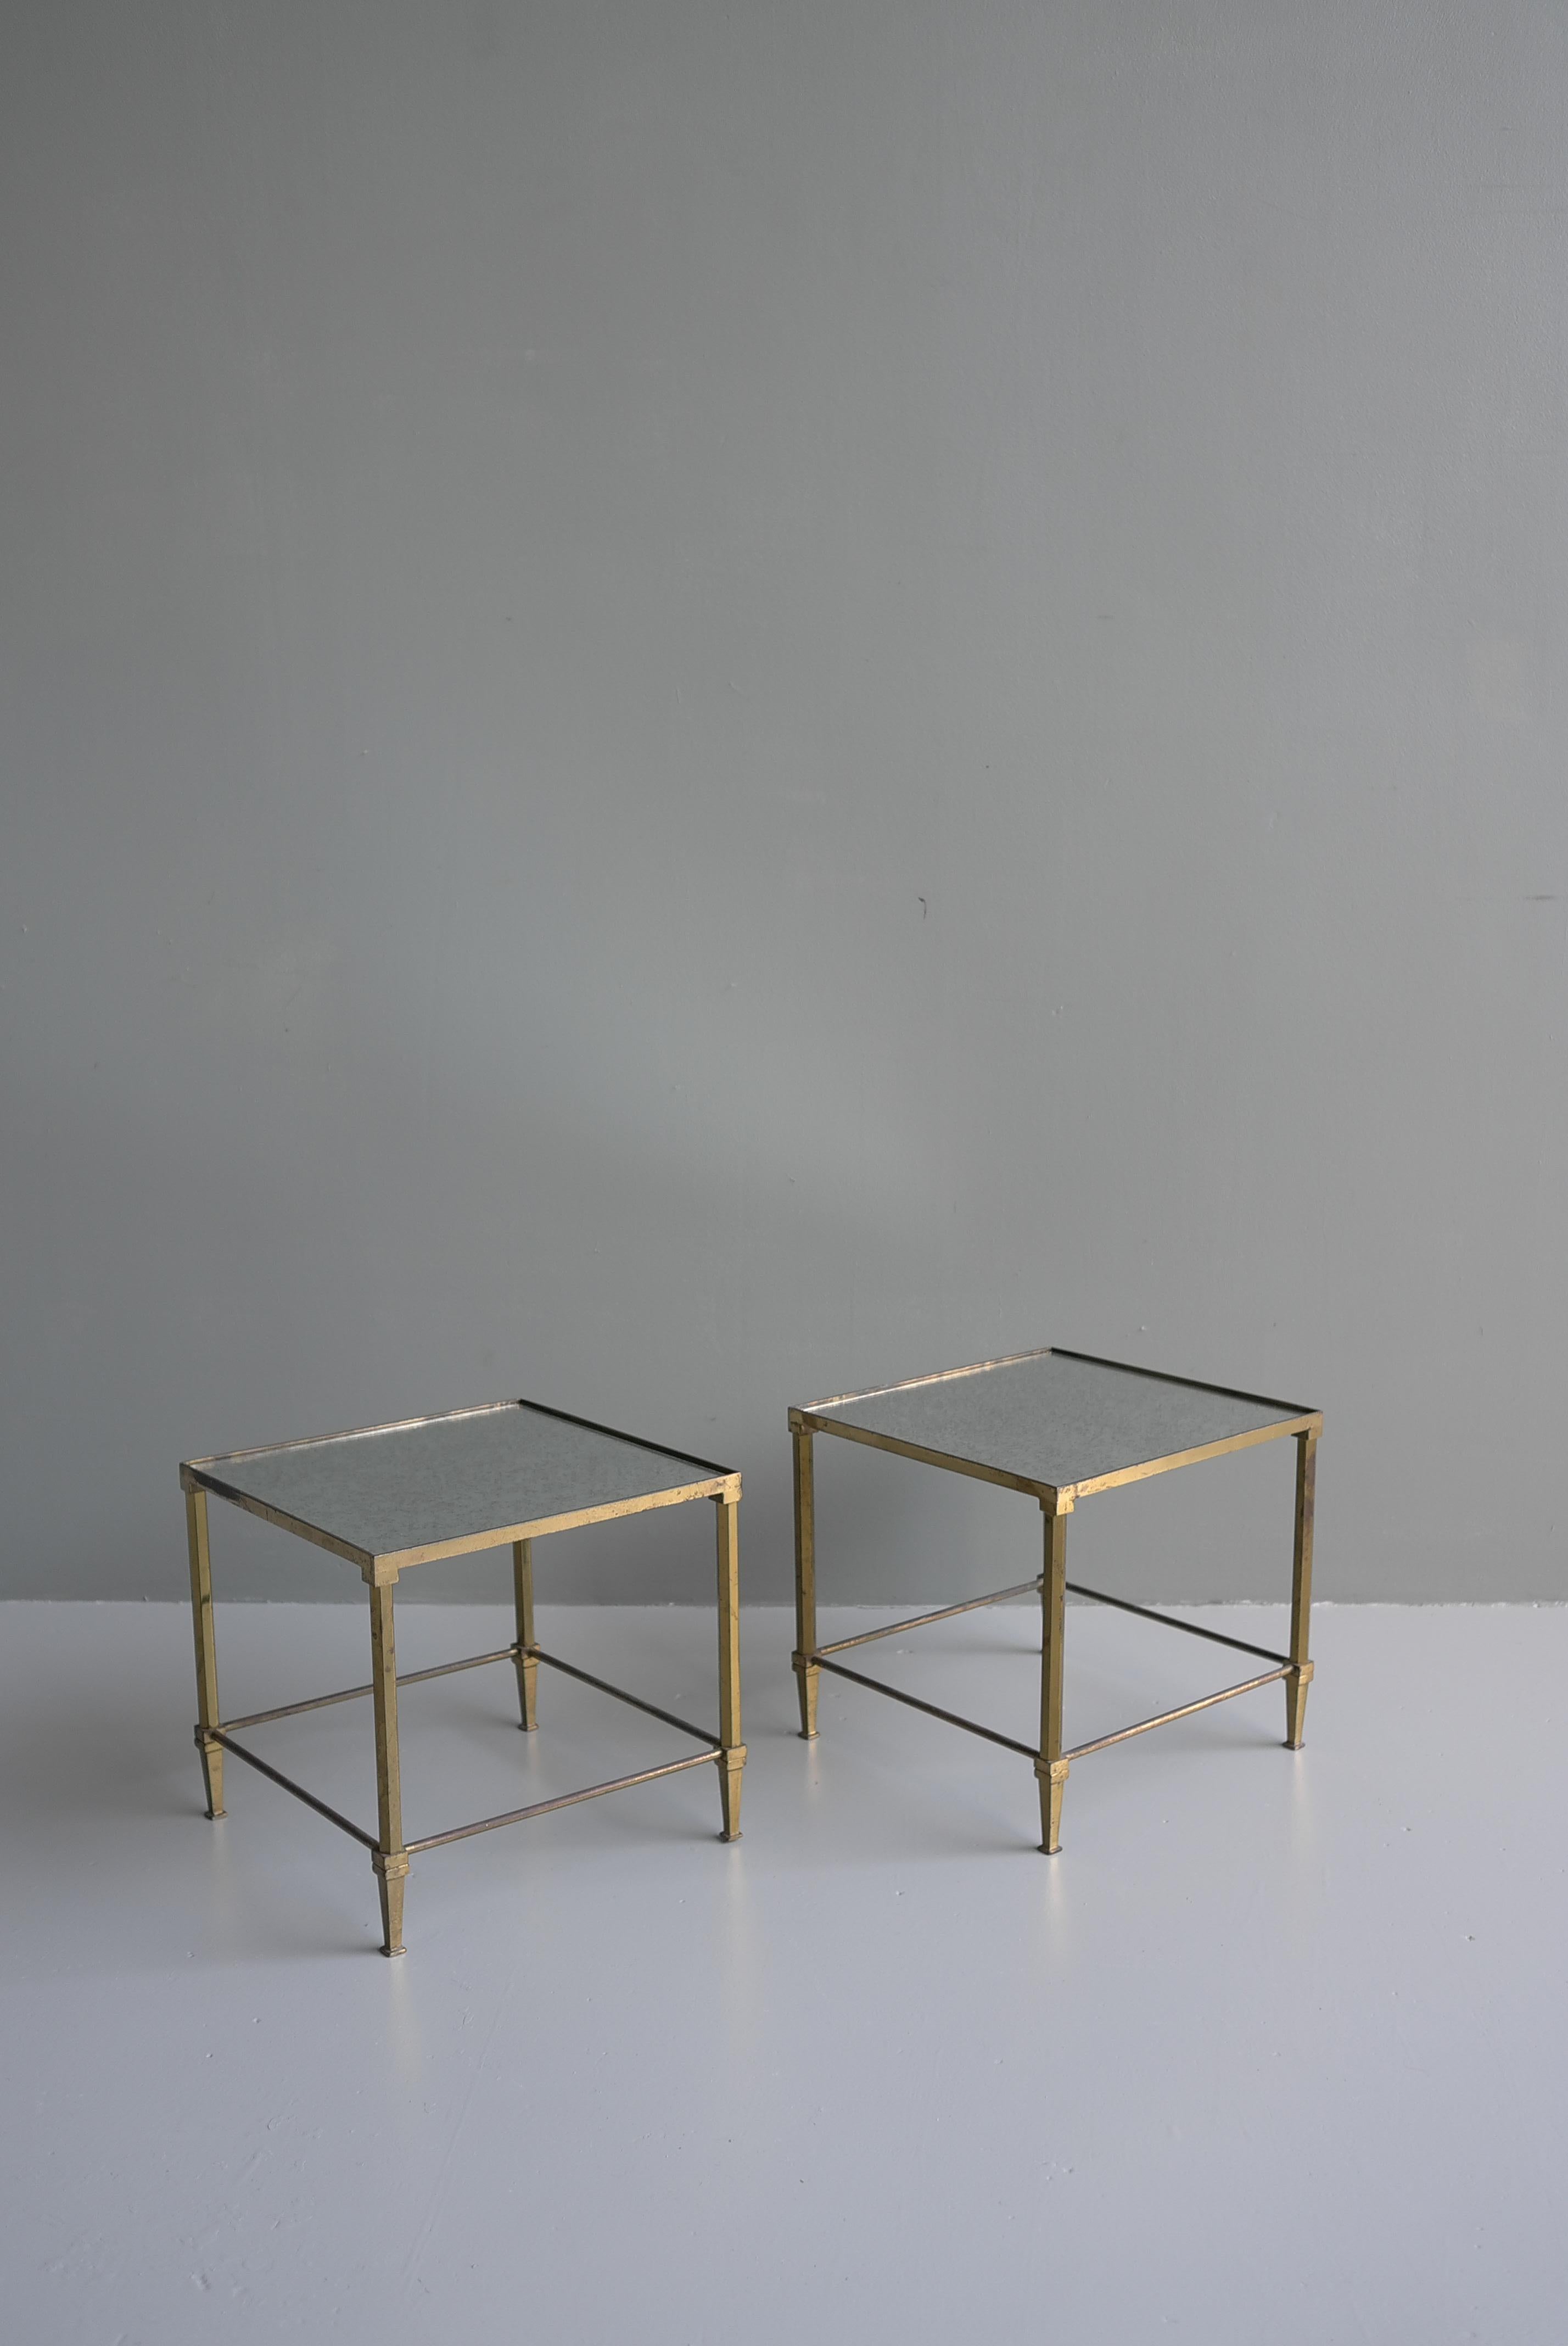 A chic pair of Maison Jansen mid-century French brass with aged mirrored top end tables, France, early 1950's.